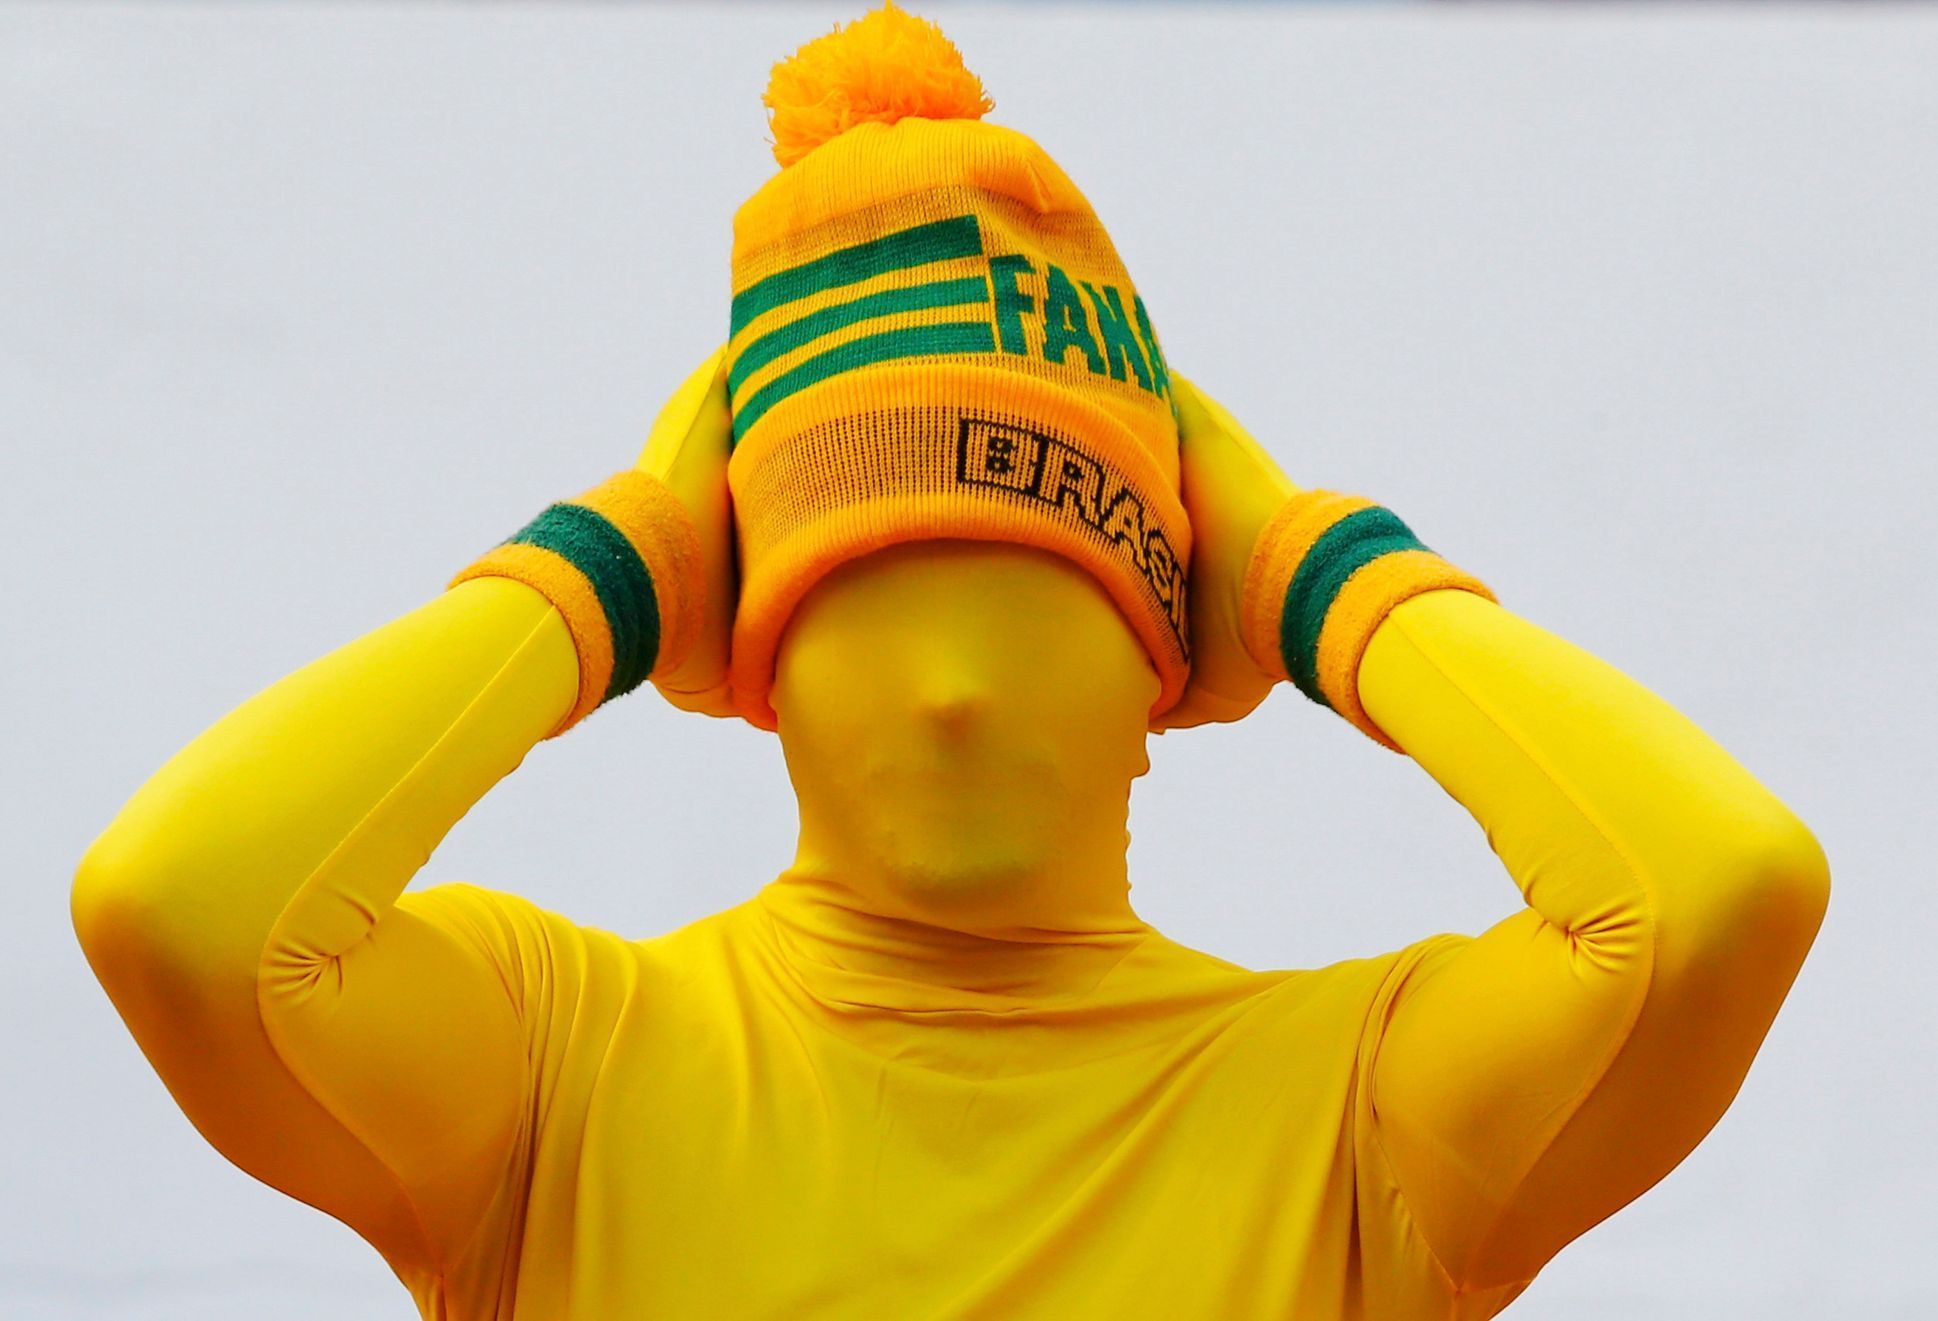 A fan of Australia is pictured during their 2014 World Cup Group B soccer match against the Netherlands at the Beira Rio stadium in Porto Alegre